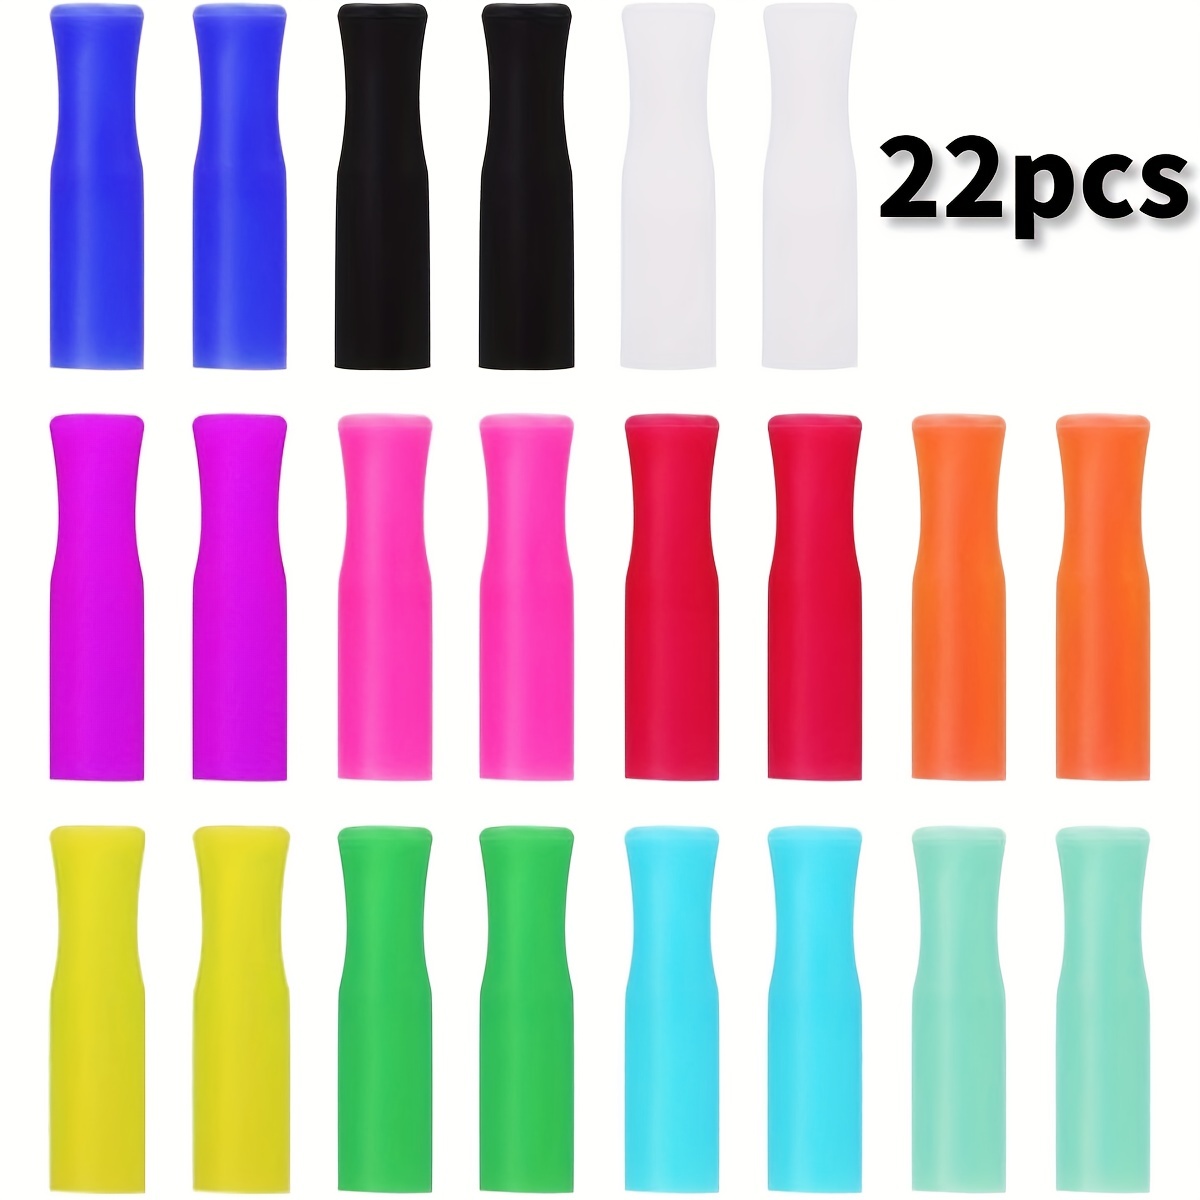 12PCS Silicone Straw Tips, Multicolored Food Grade Straws Tips Covers Only  Fit for 1/4 Inch Wide(6MM Outdiameter) Stainless Steel Straws-Multicolor  6mm Silicone Tips